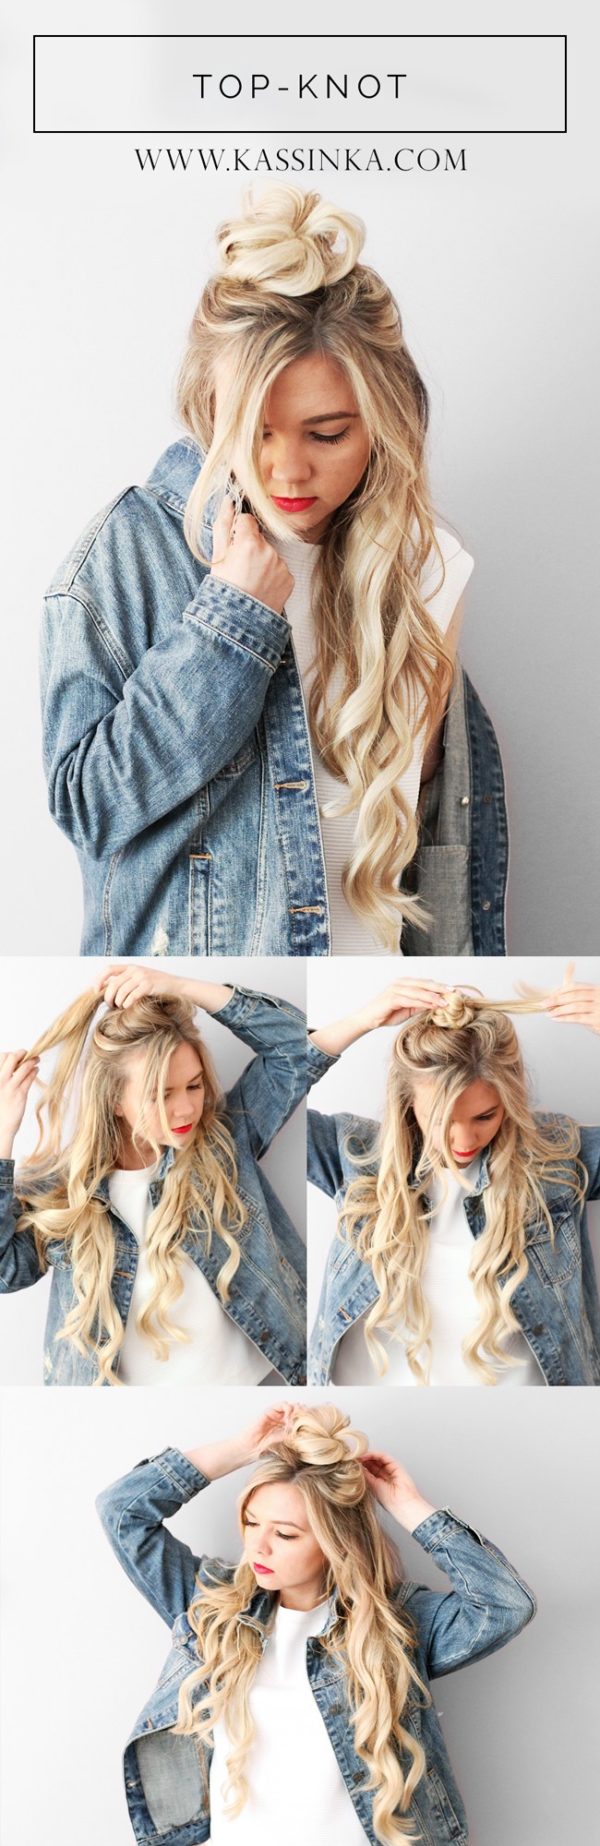 10 Spring Hairstyles You’d Love To Have